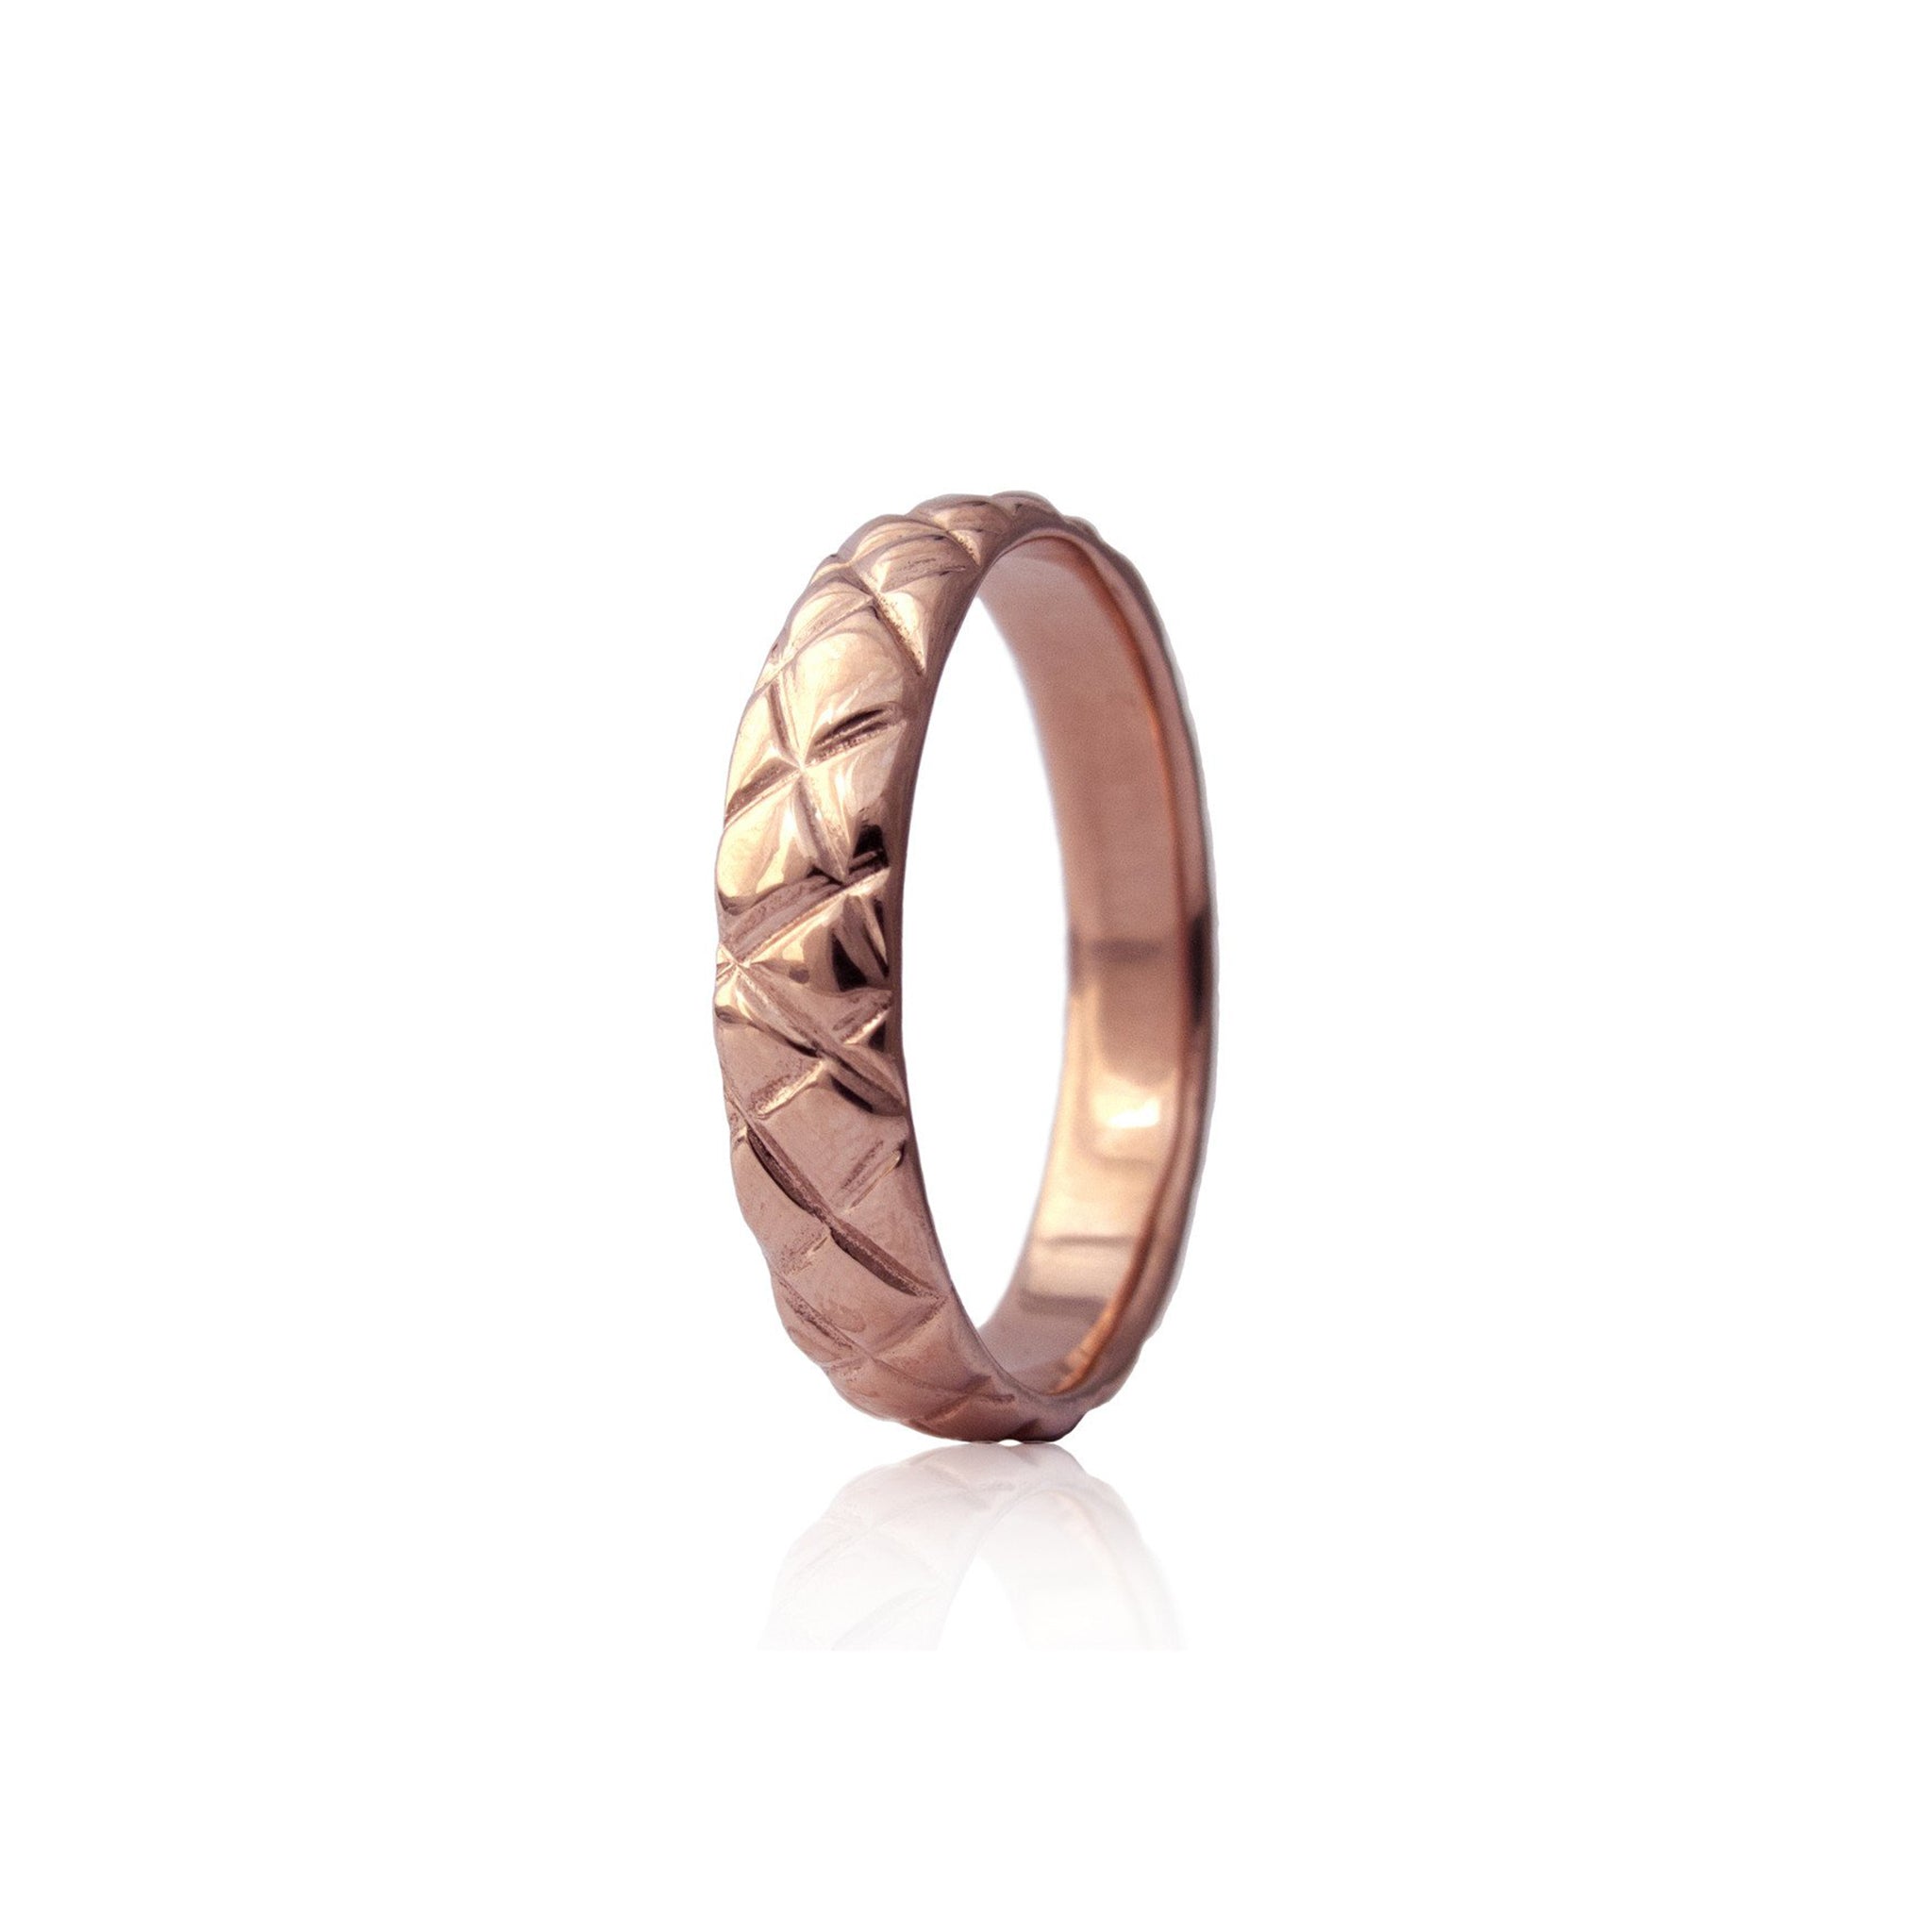 Crafted in 14KT rose gold, this 4.5mm men’s ring features a quilt-inspired pattern all around the band.